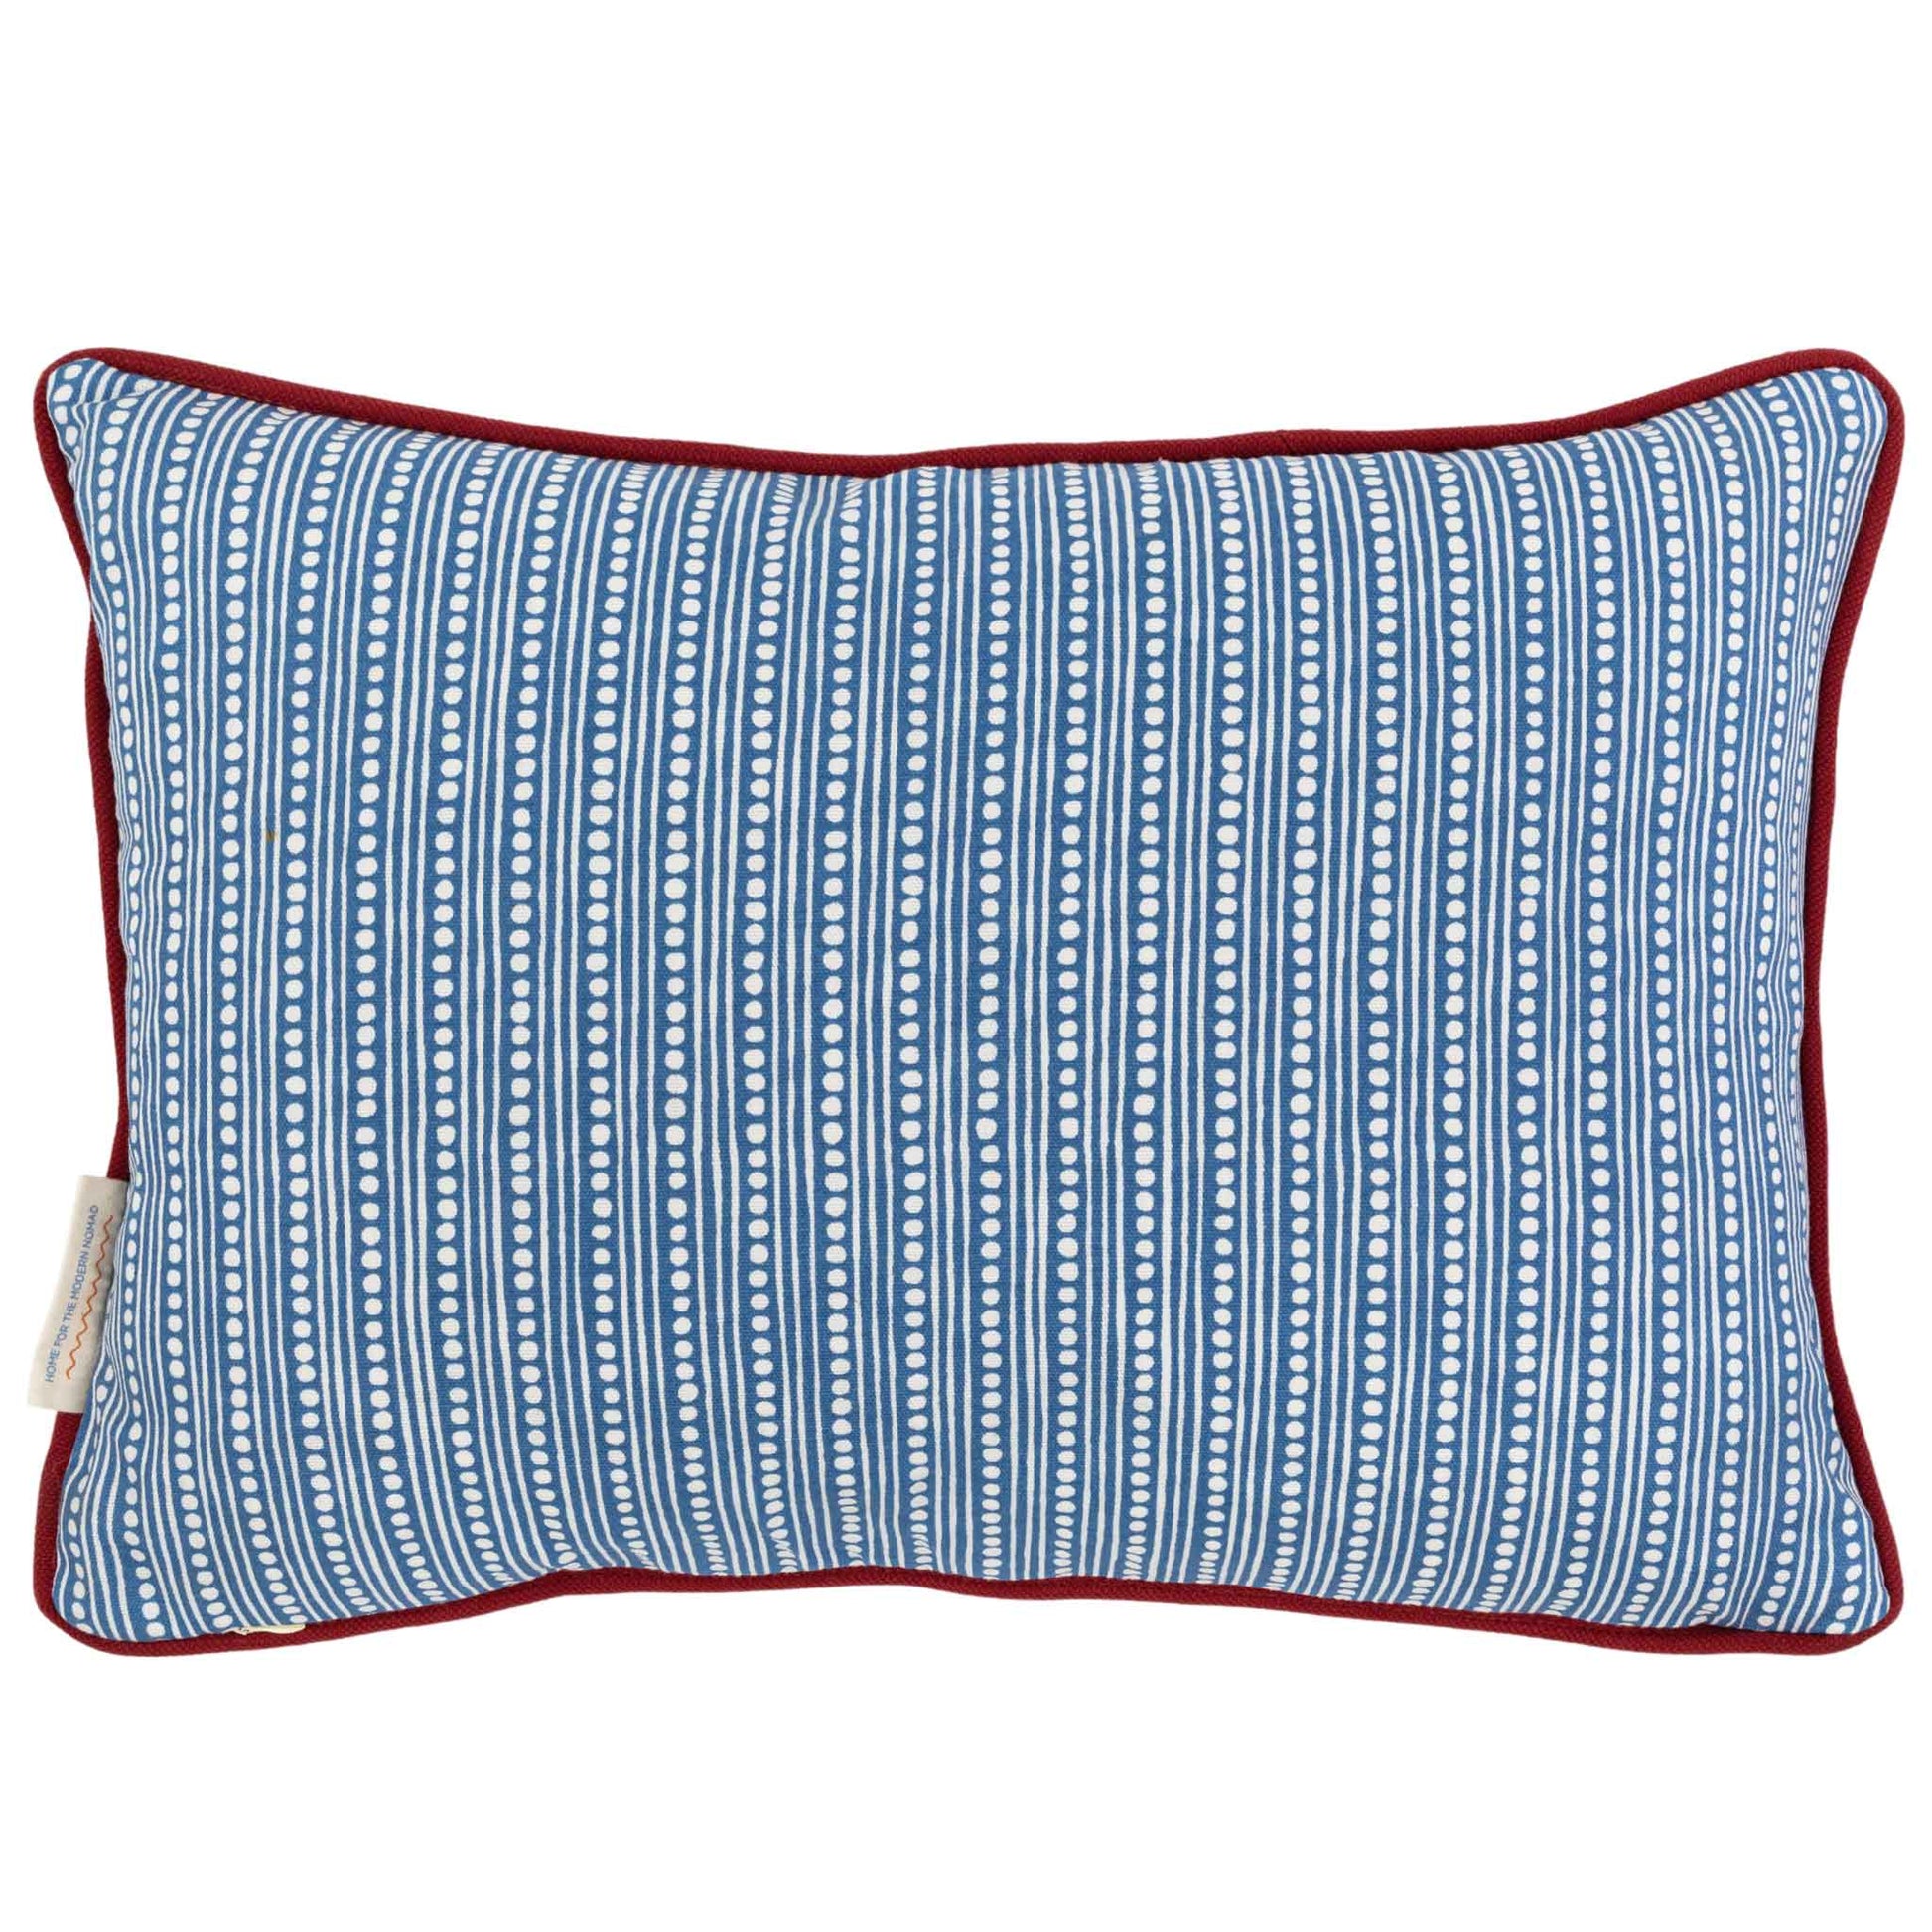 woven striped cushion red blue